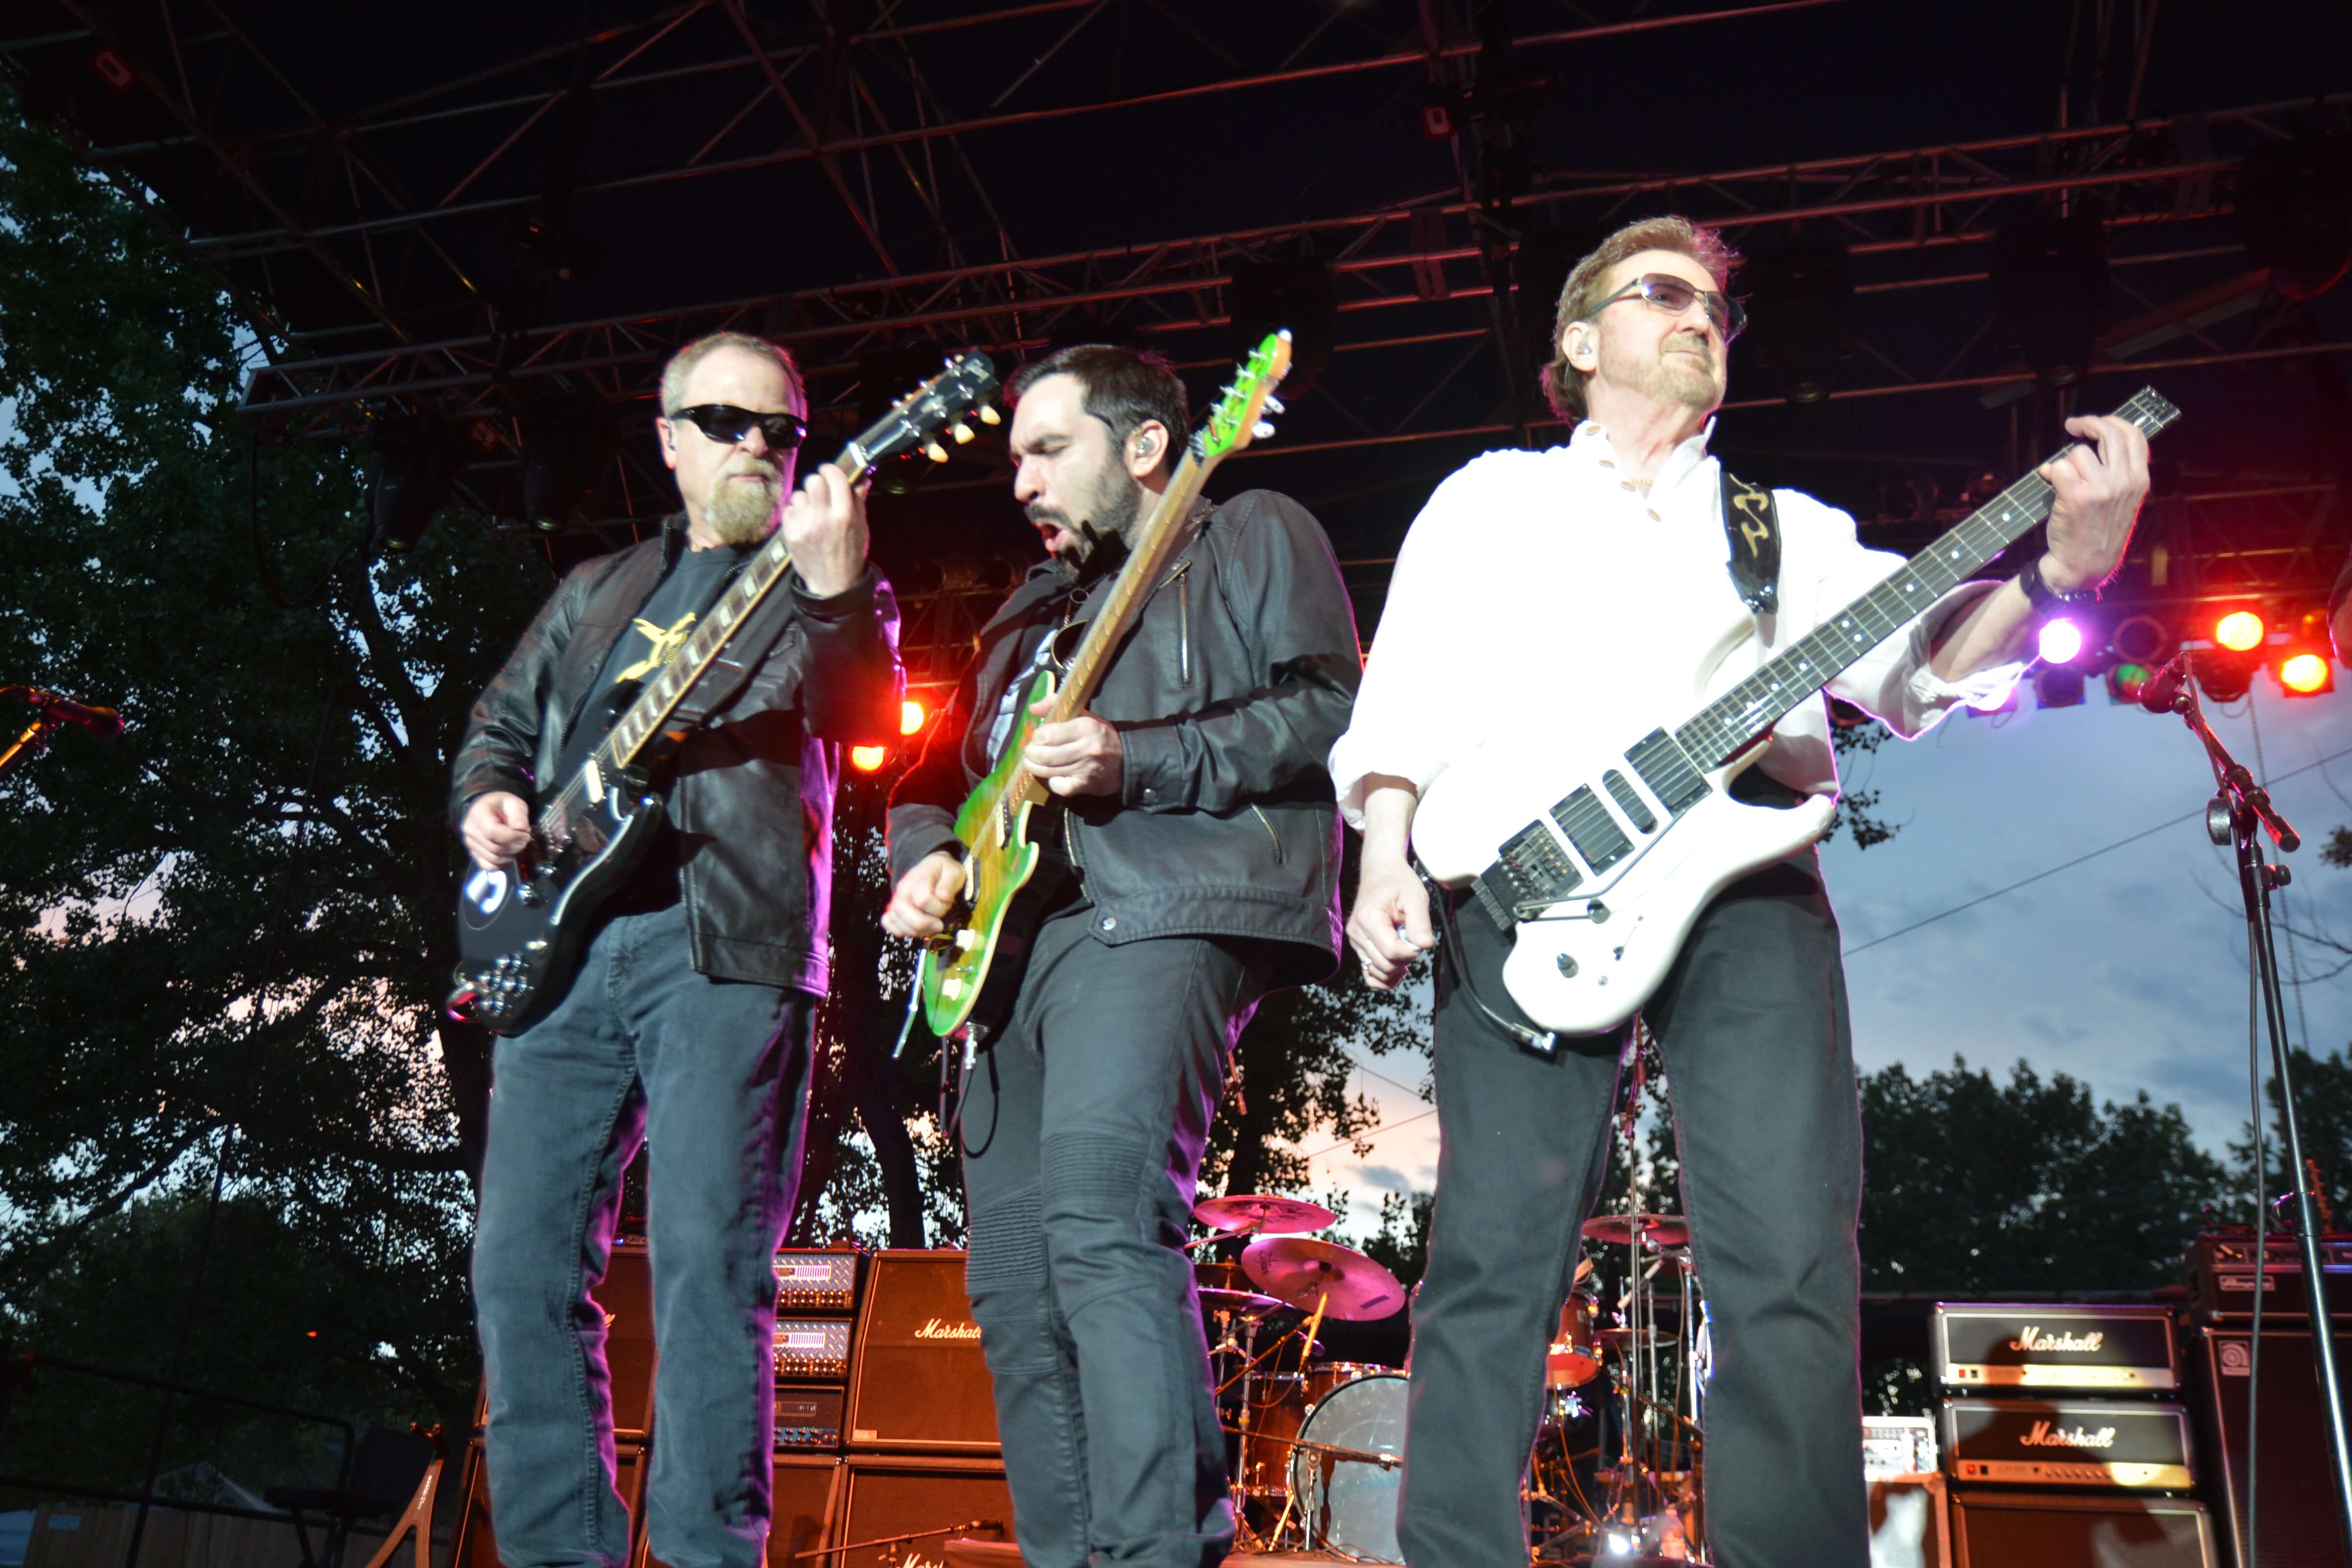 Blue Oyster Cult in concert